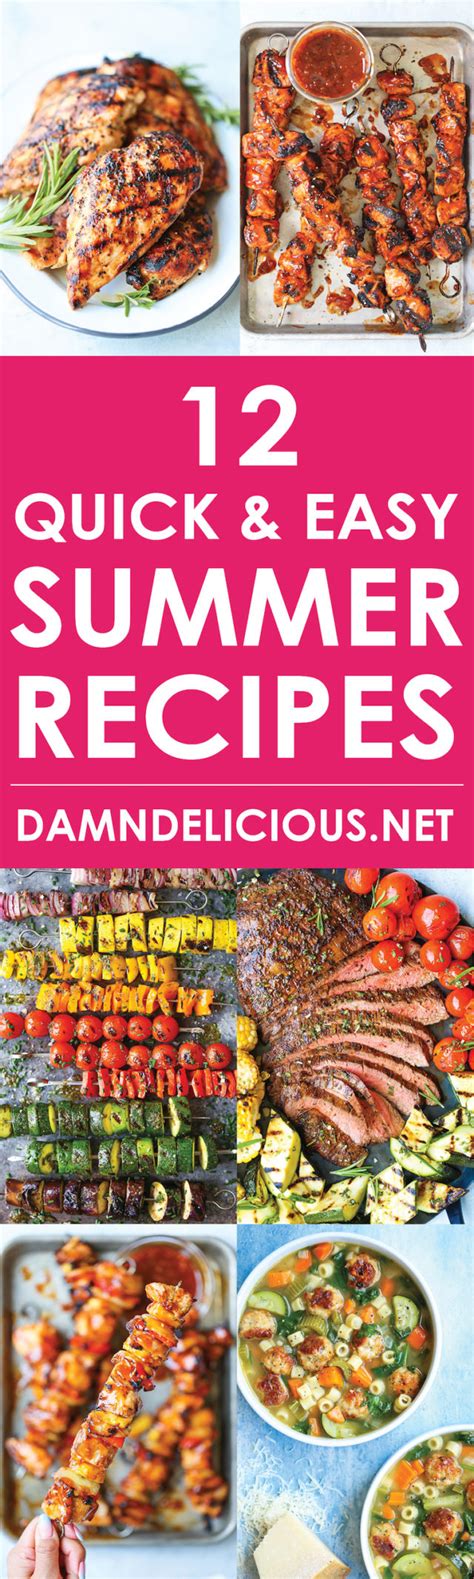 12 Quick And Easy Summer Recipes Damn Delicious